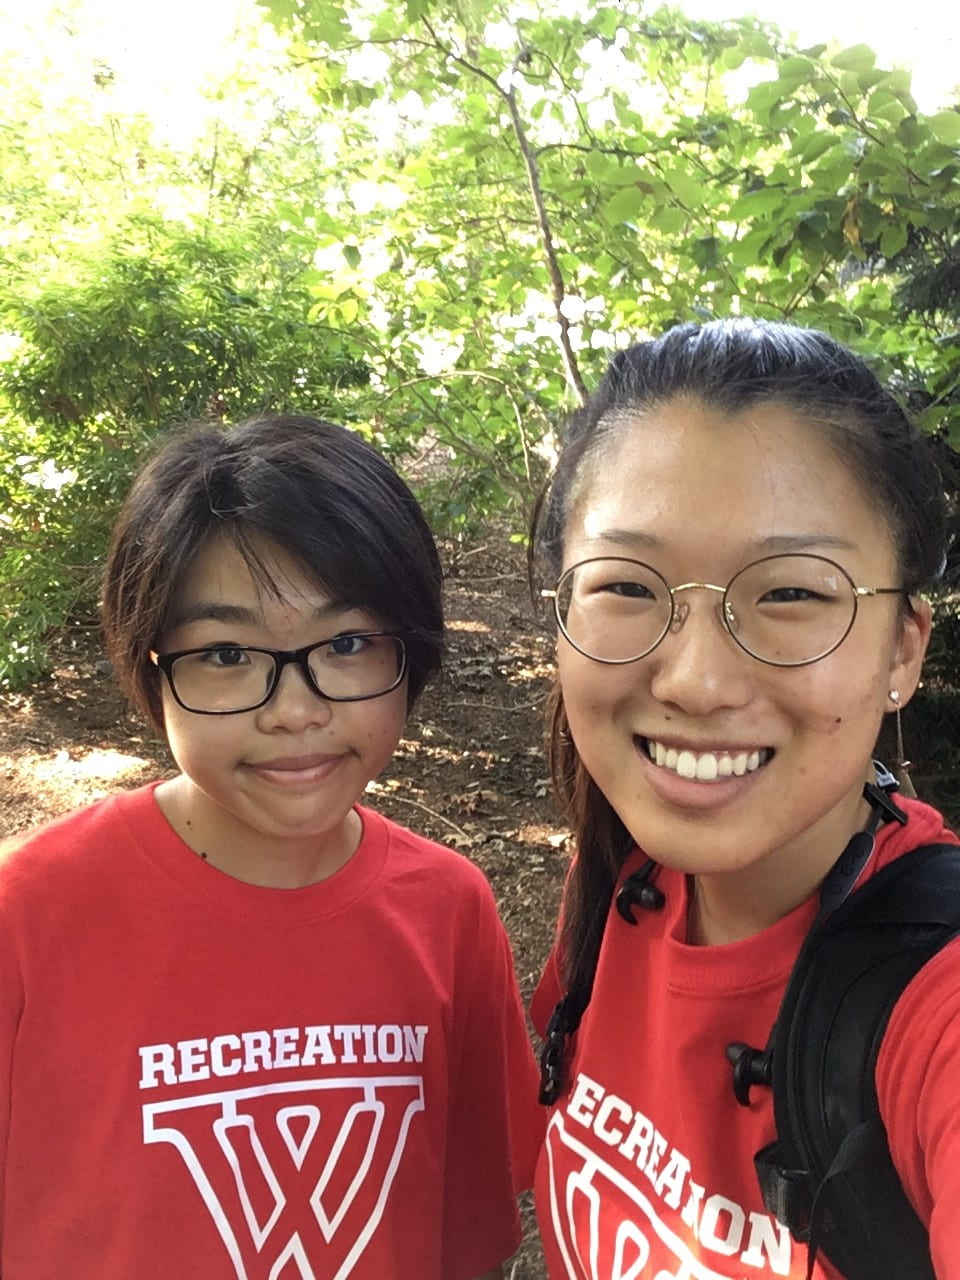 Emily with her friend and exchange student from Smith, both wearing red shirts with a large W